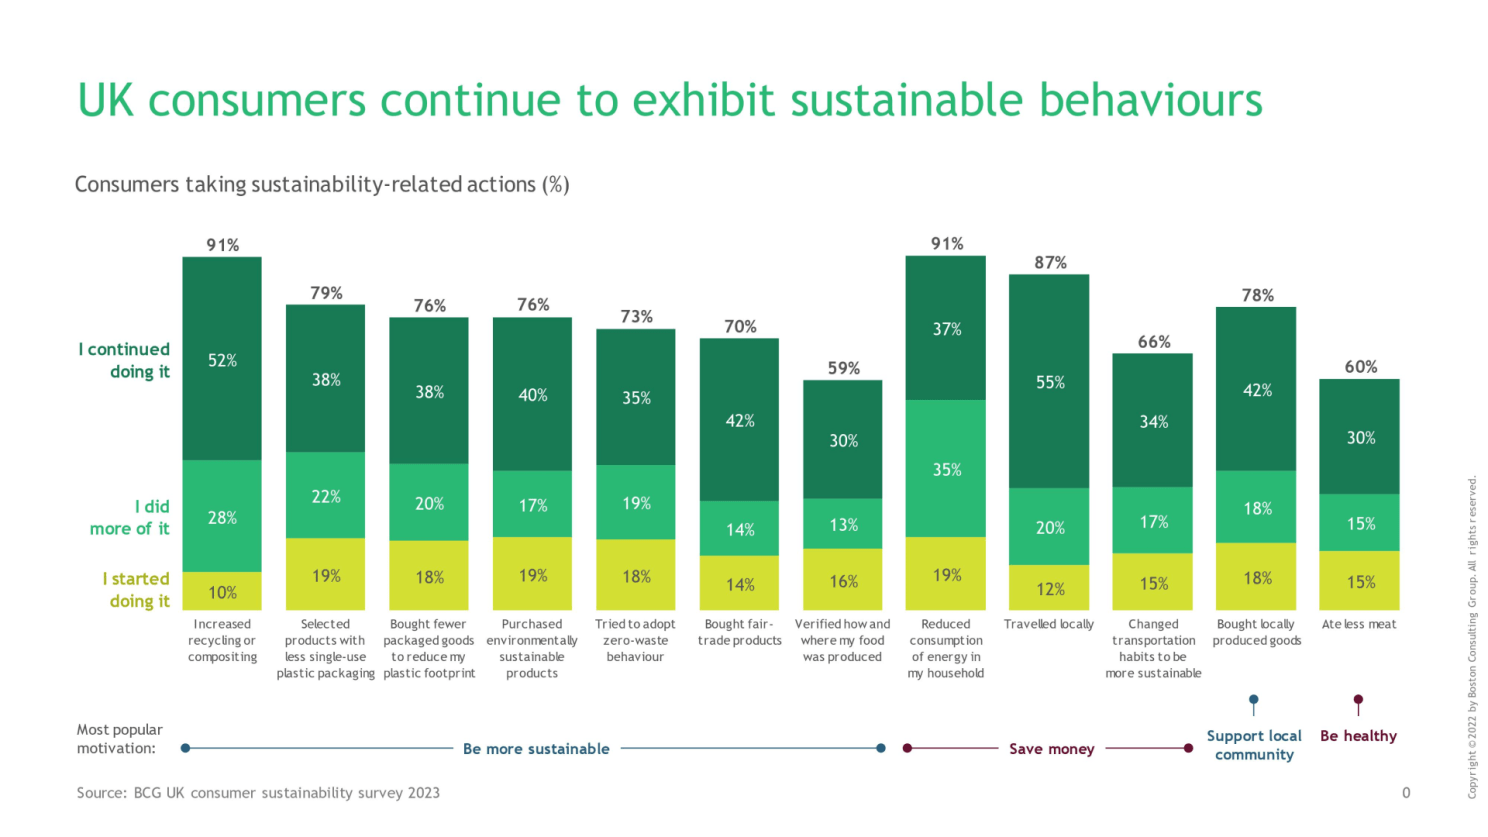 The UK consumers continue to exhibit sustainable behaviours as per a BCG UK consumer sustainability survey in 2023.